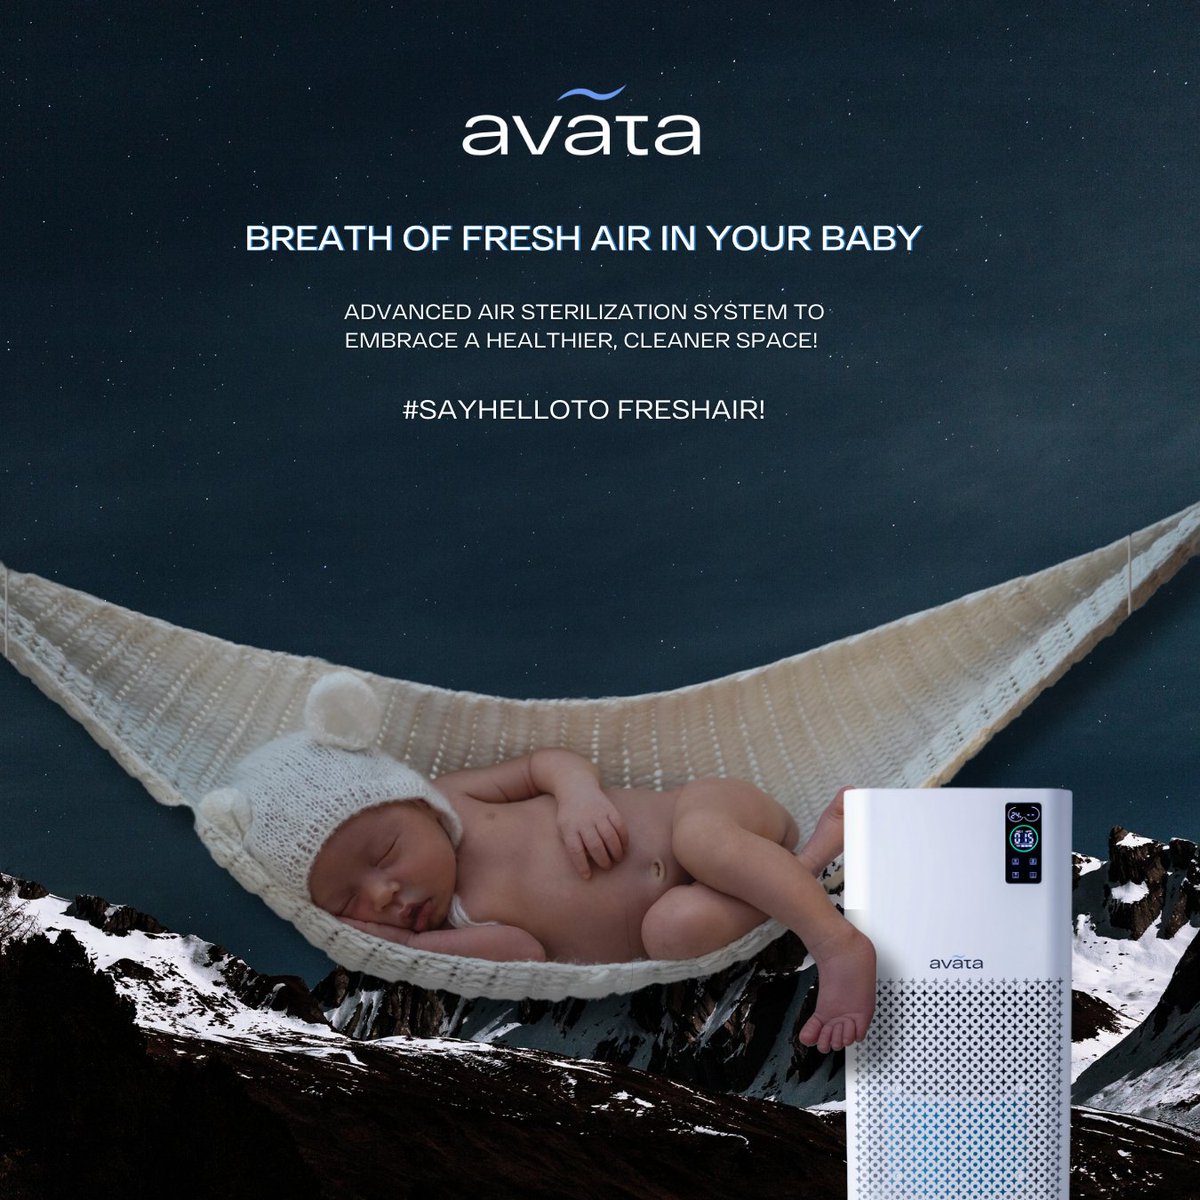 Breathe in the magic of freshness with Avata! Introducing our advanced air sterilization system that creates a cleaner and healthier environment for your baby. Say hello to a breath of fresh air and embrace a new level of freshness!  #Avata #FreshAirForBabies #HealthierLiving